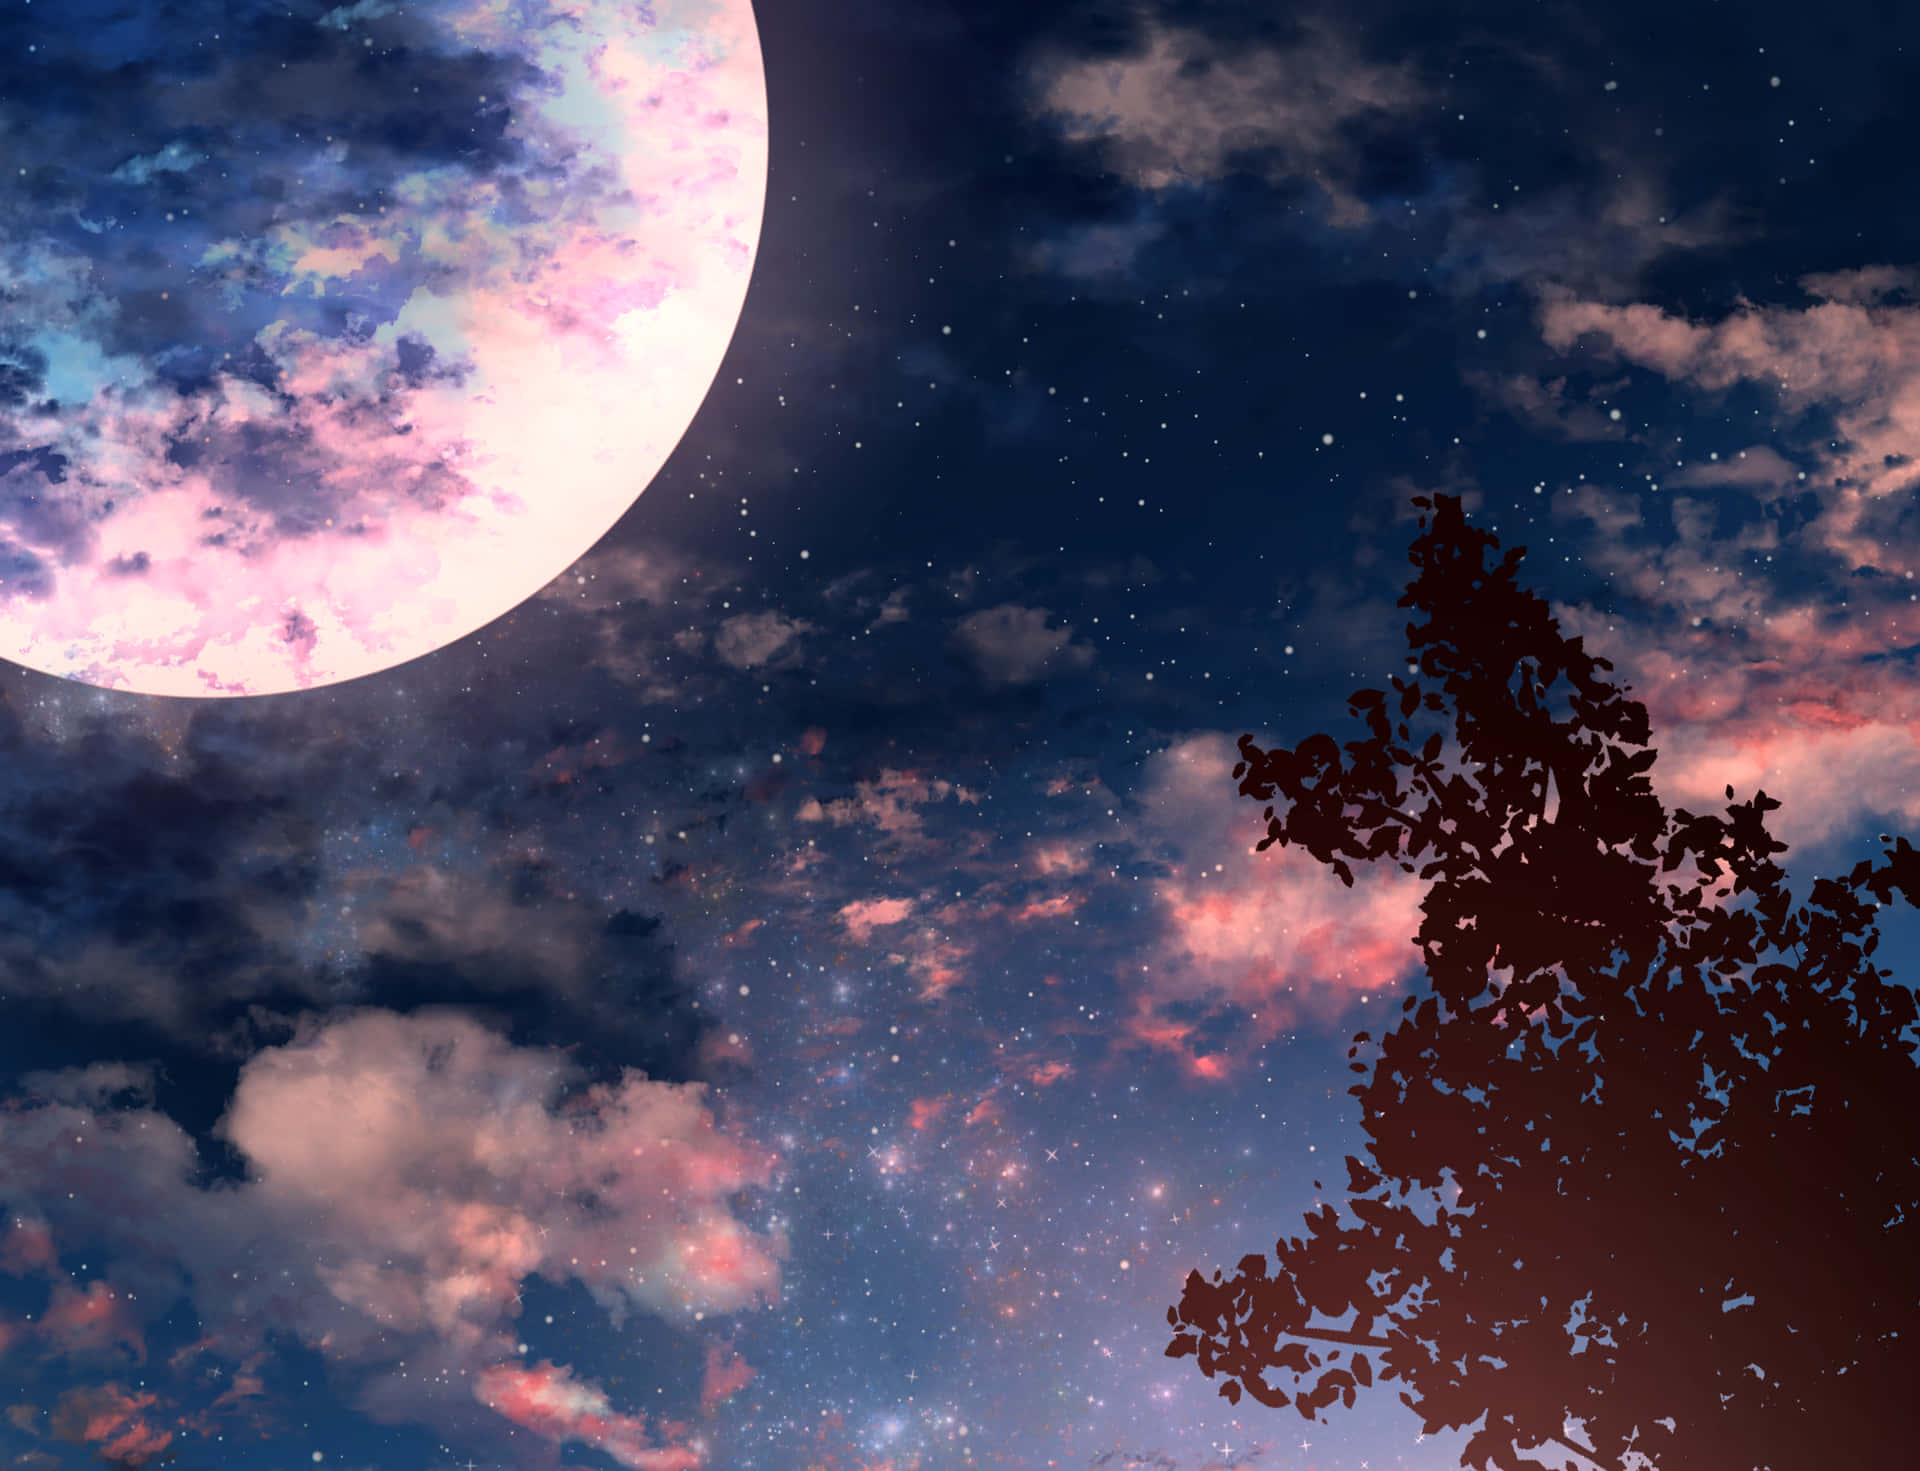 Soaking in the stunning beauty of the Aesthetic Night Sky. Wallpaper